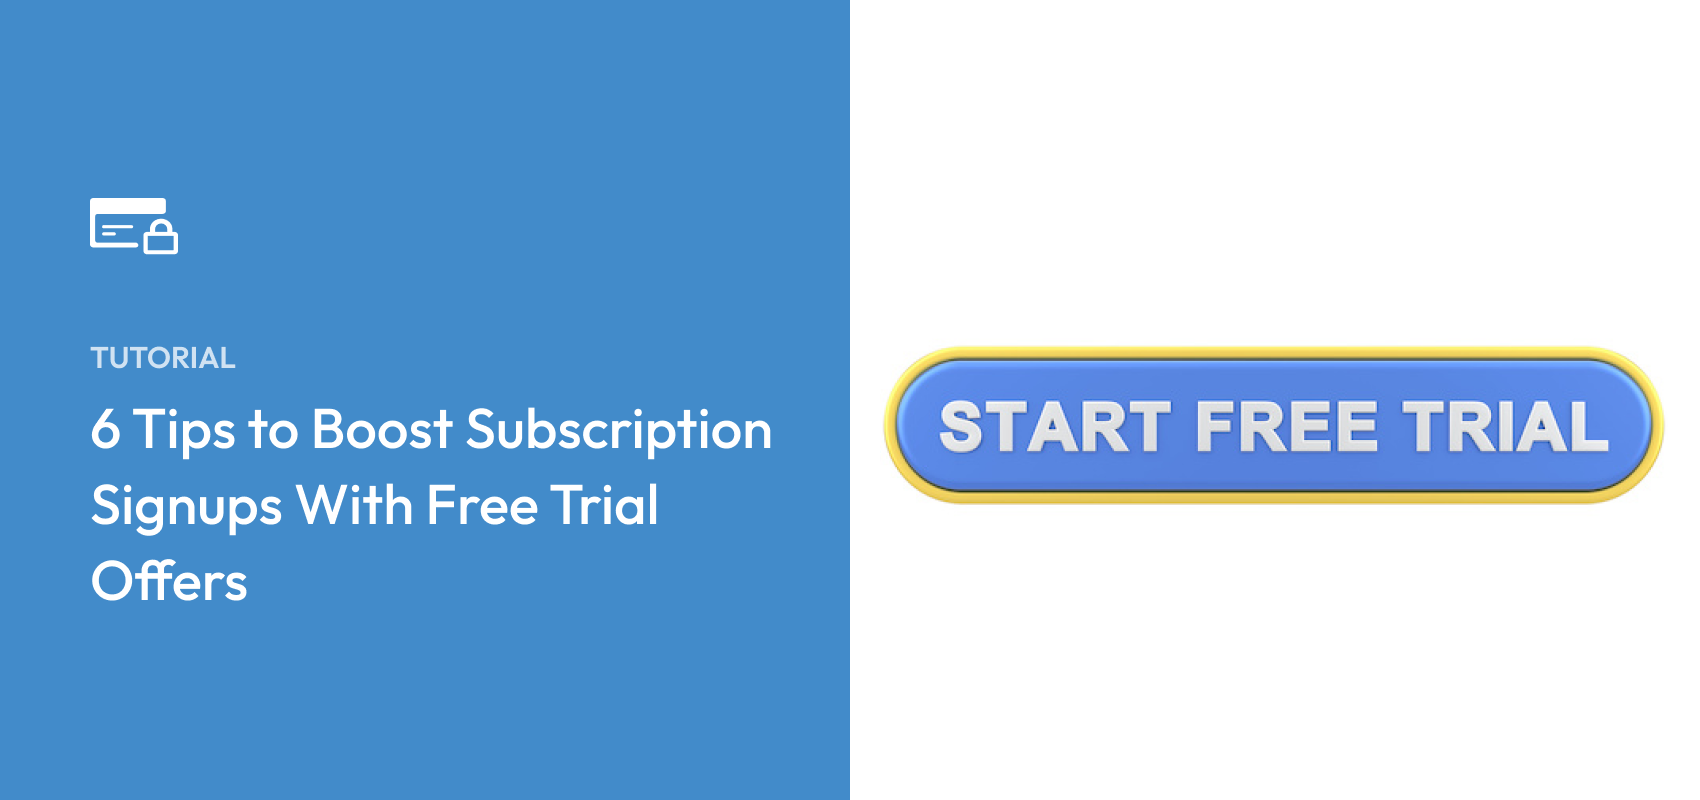 Take the free trial opportunity